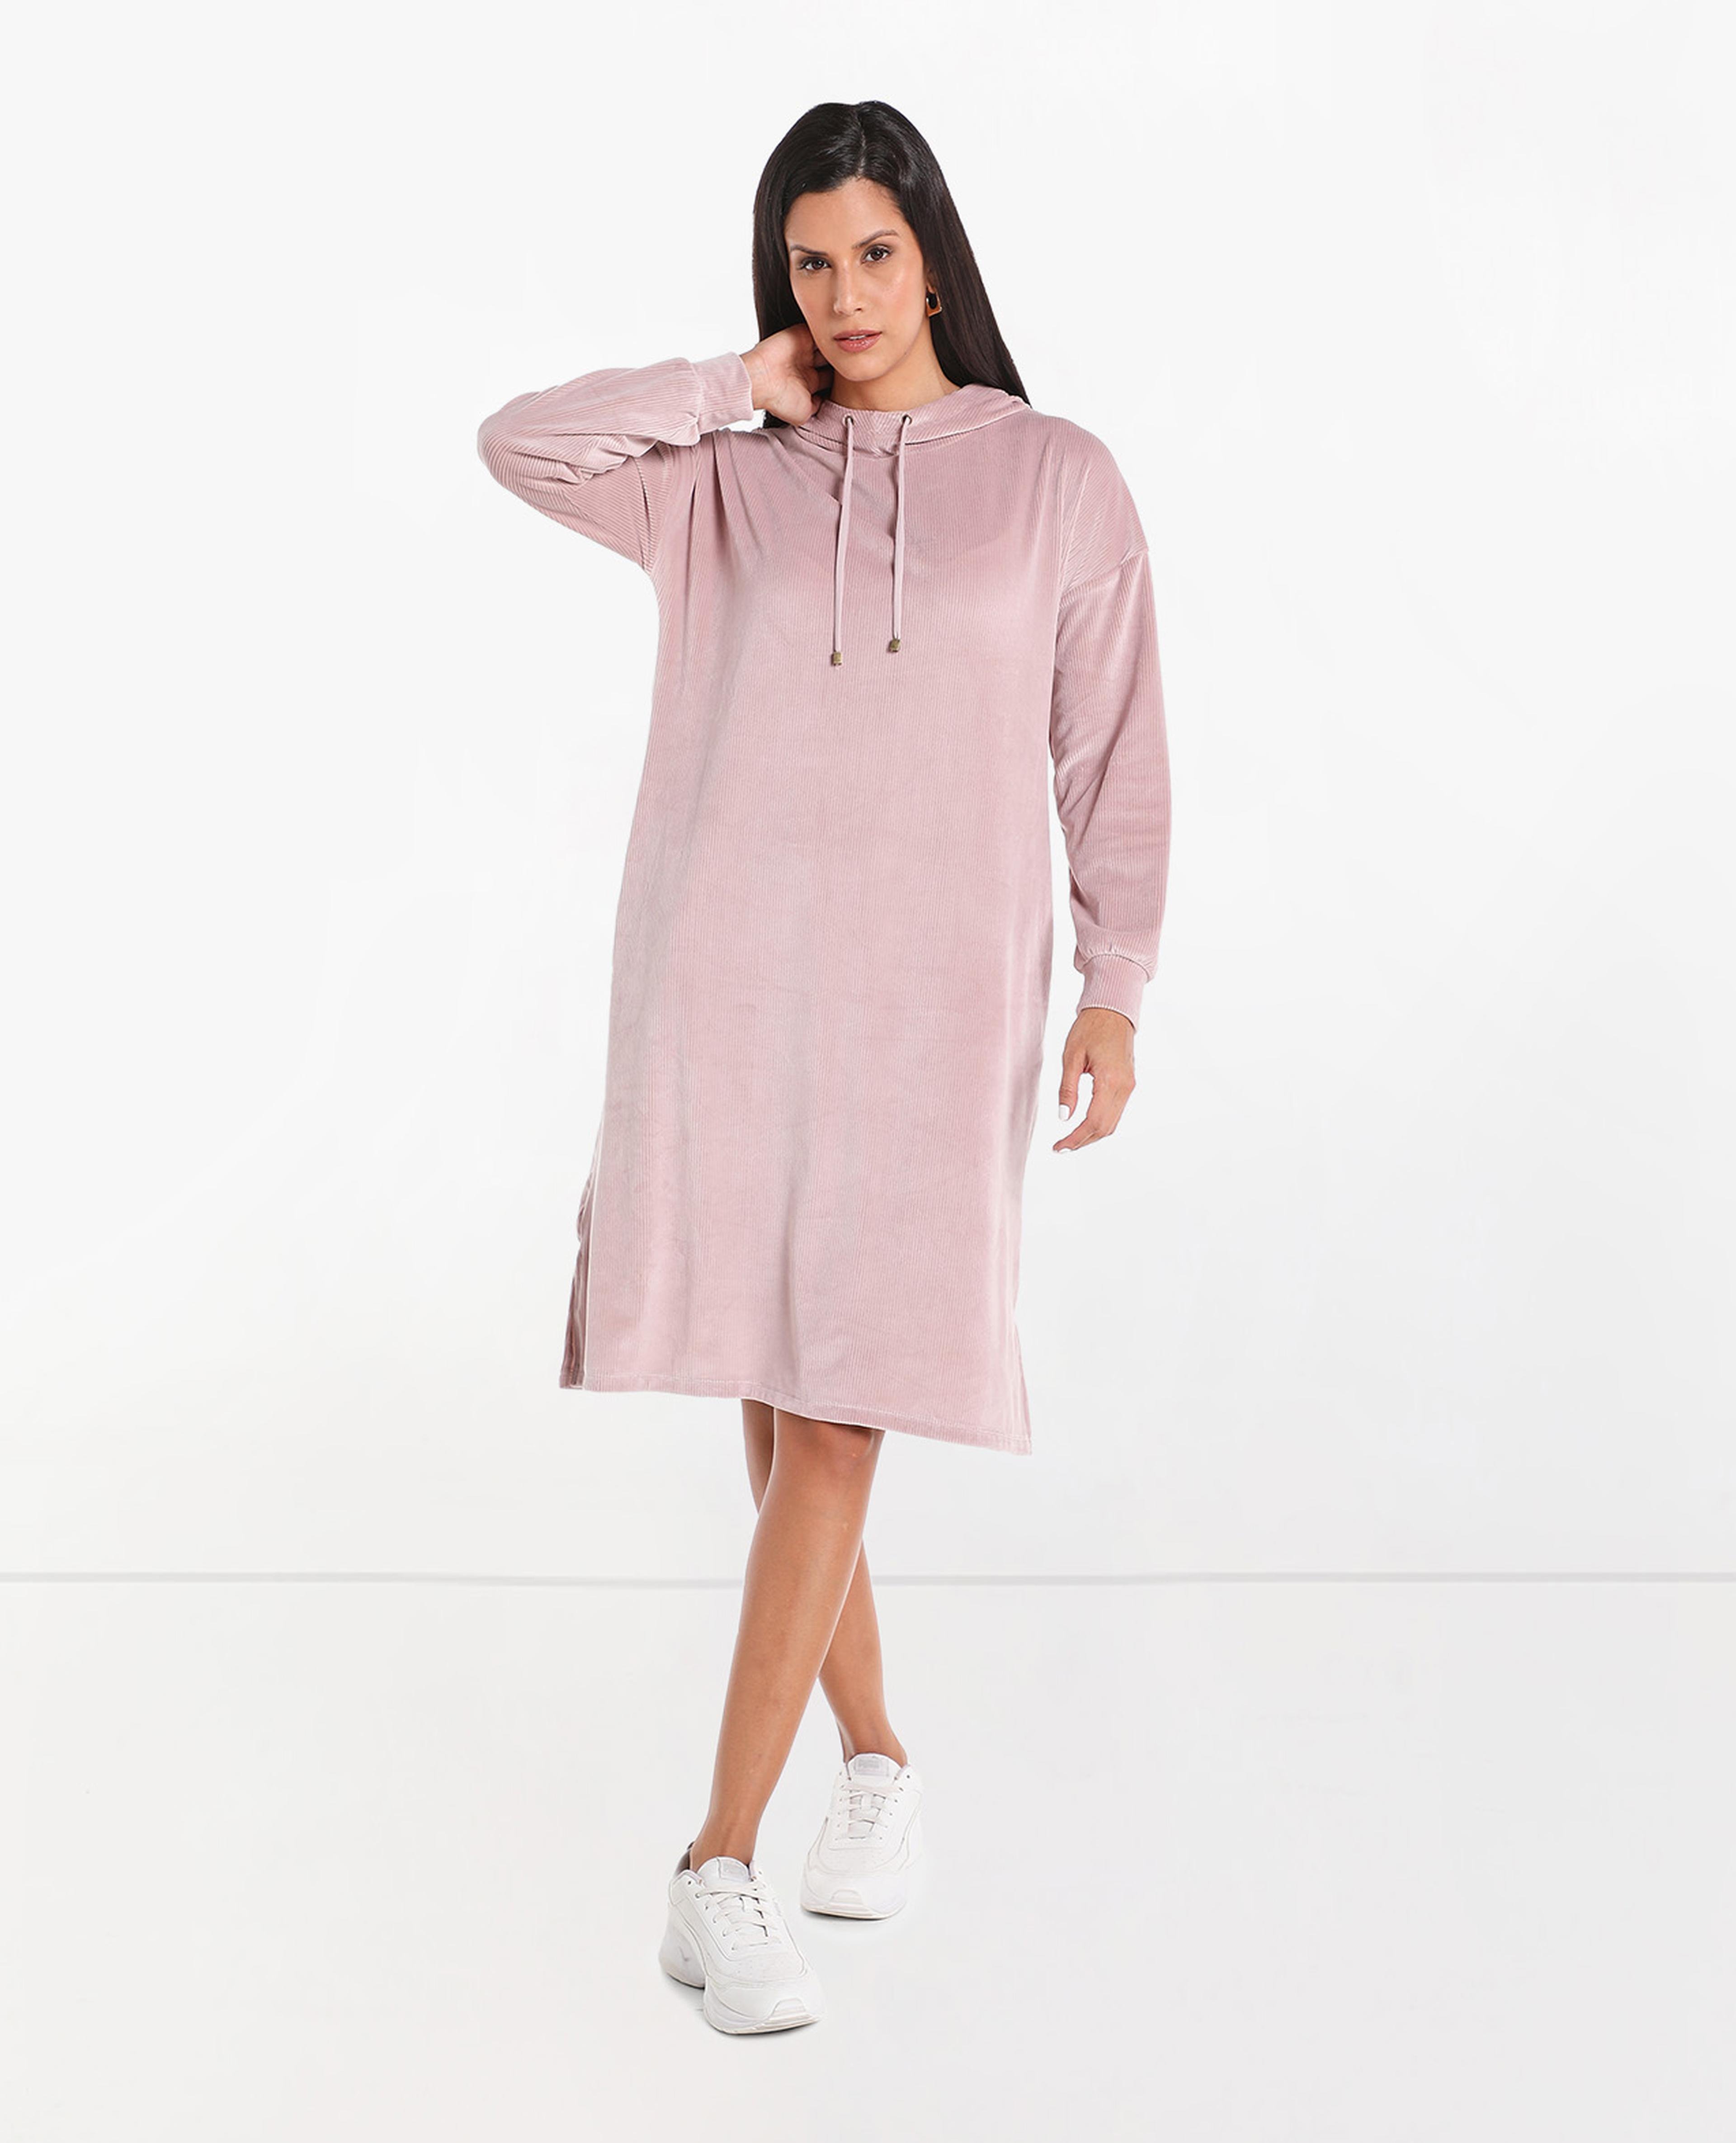 Solid Hooded Sweatshirt Dress with side slits